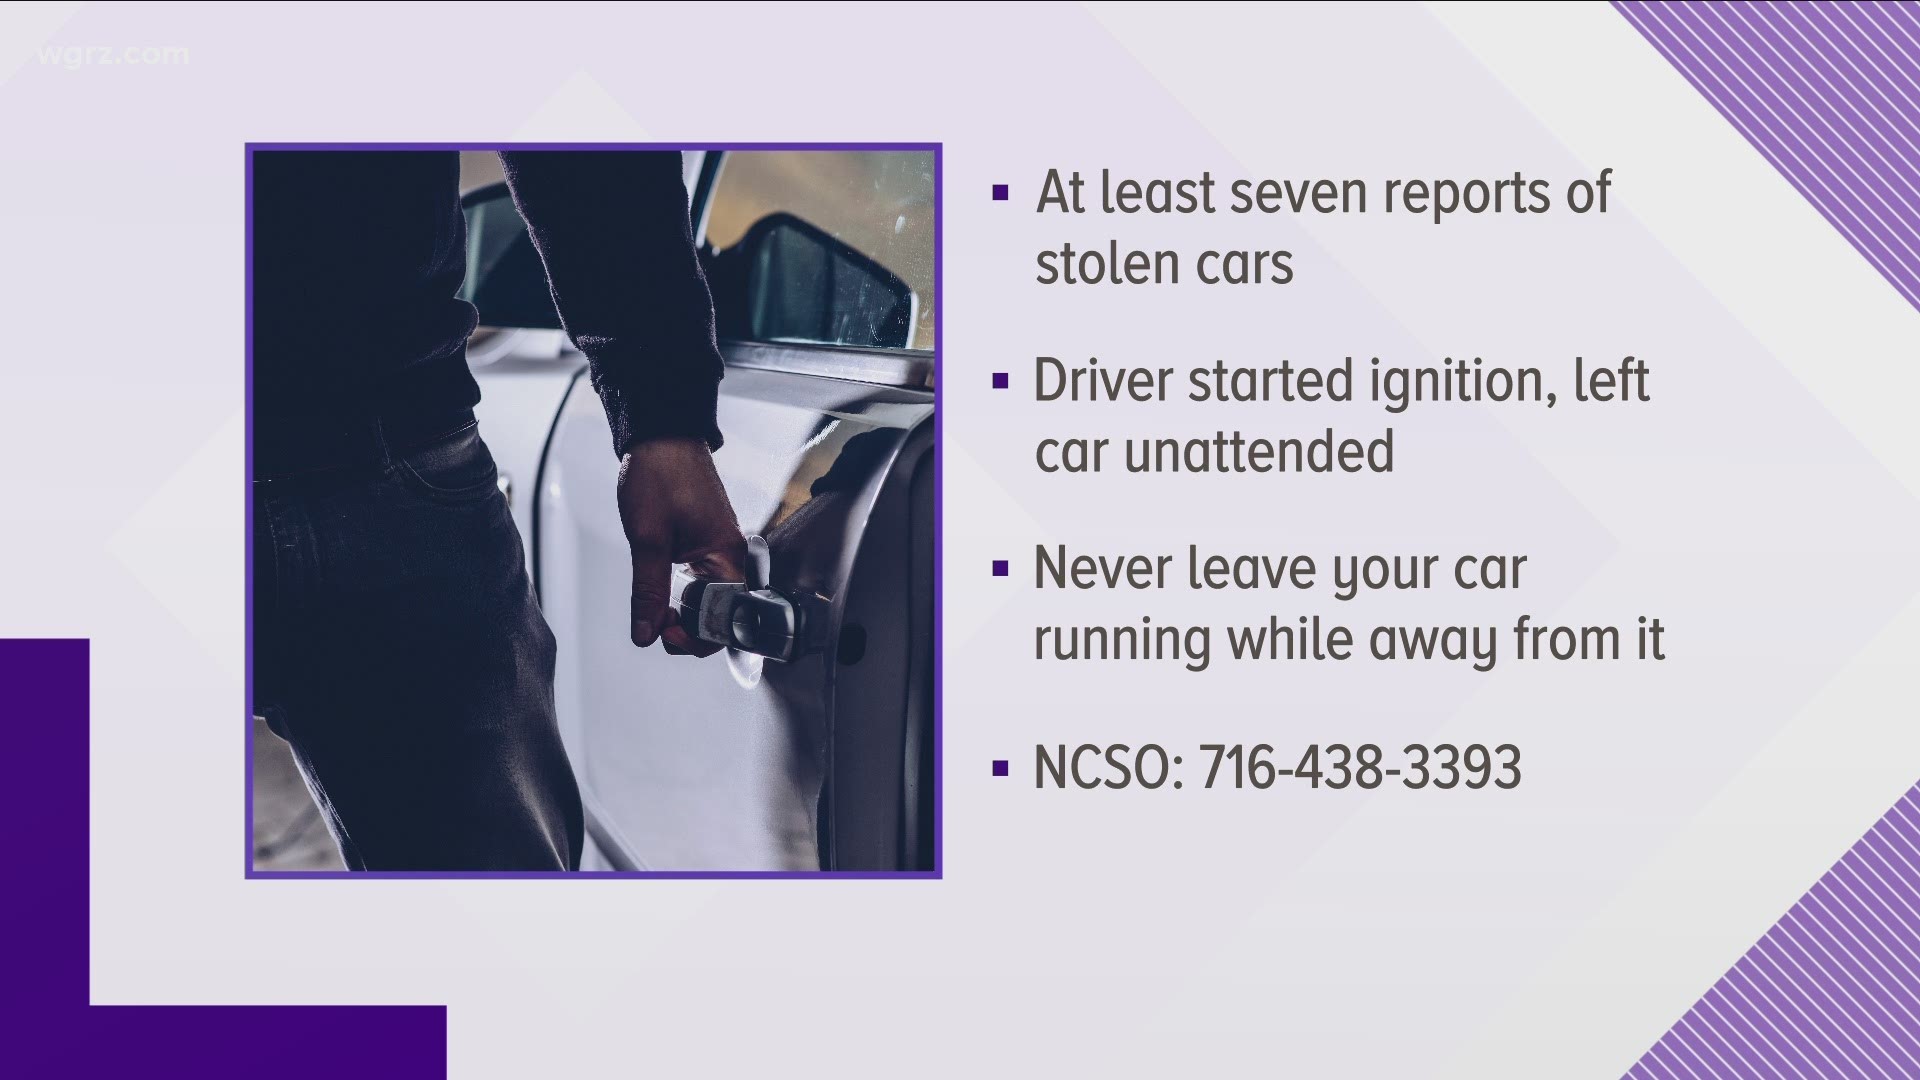 NCSO warns of stolen cars left unattended